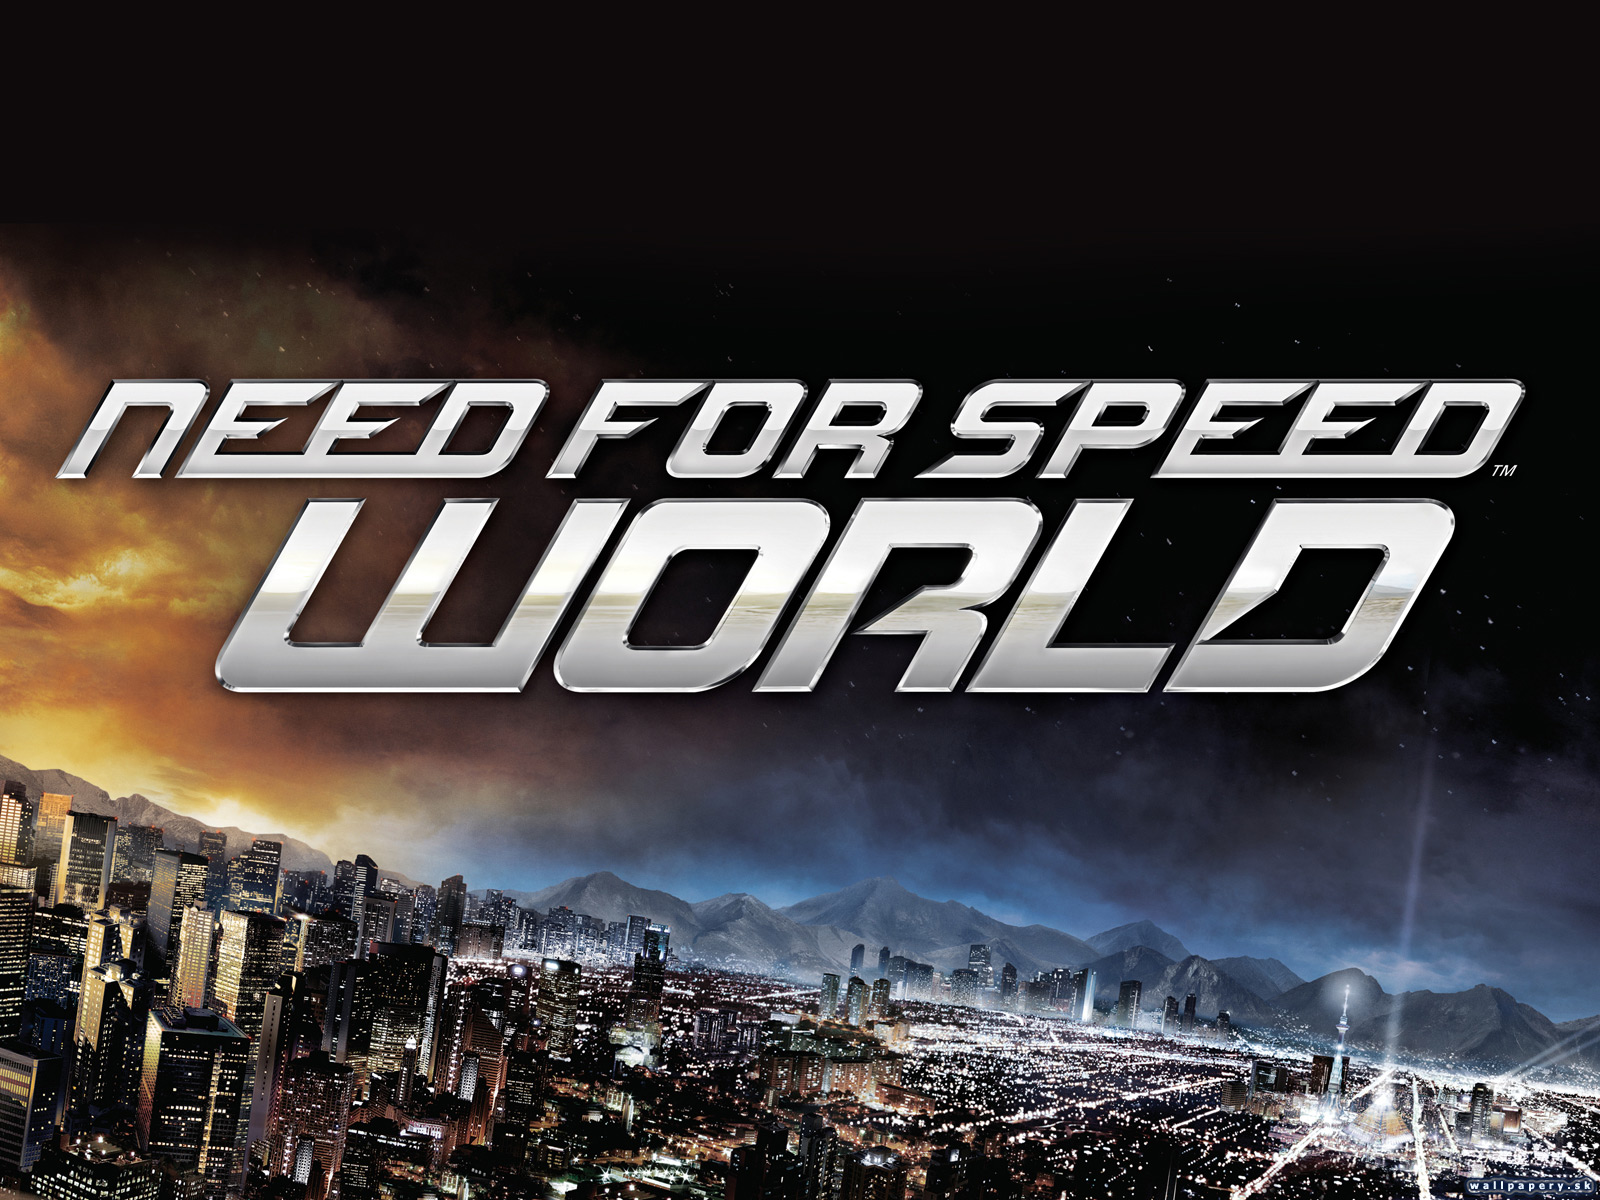 Need for Speed: World - wallpaper 2